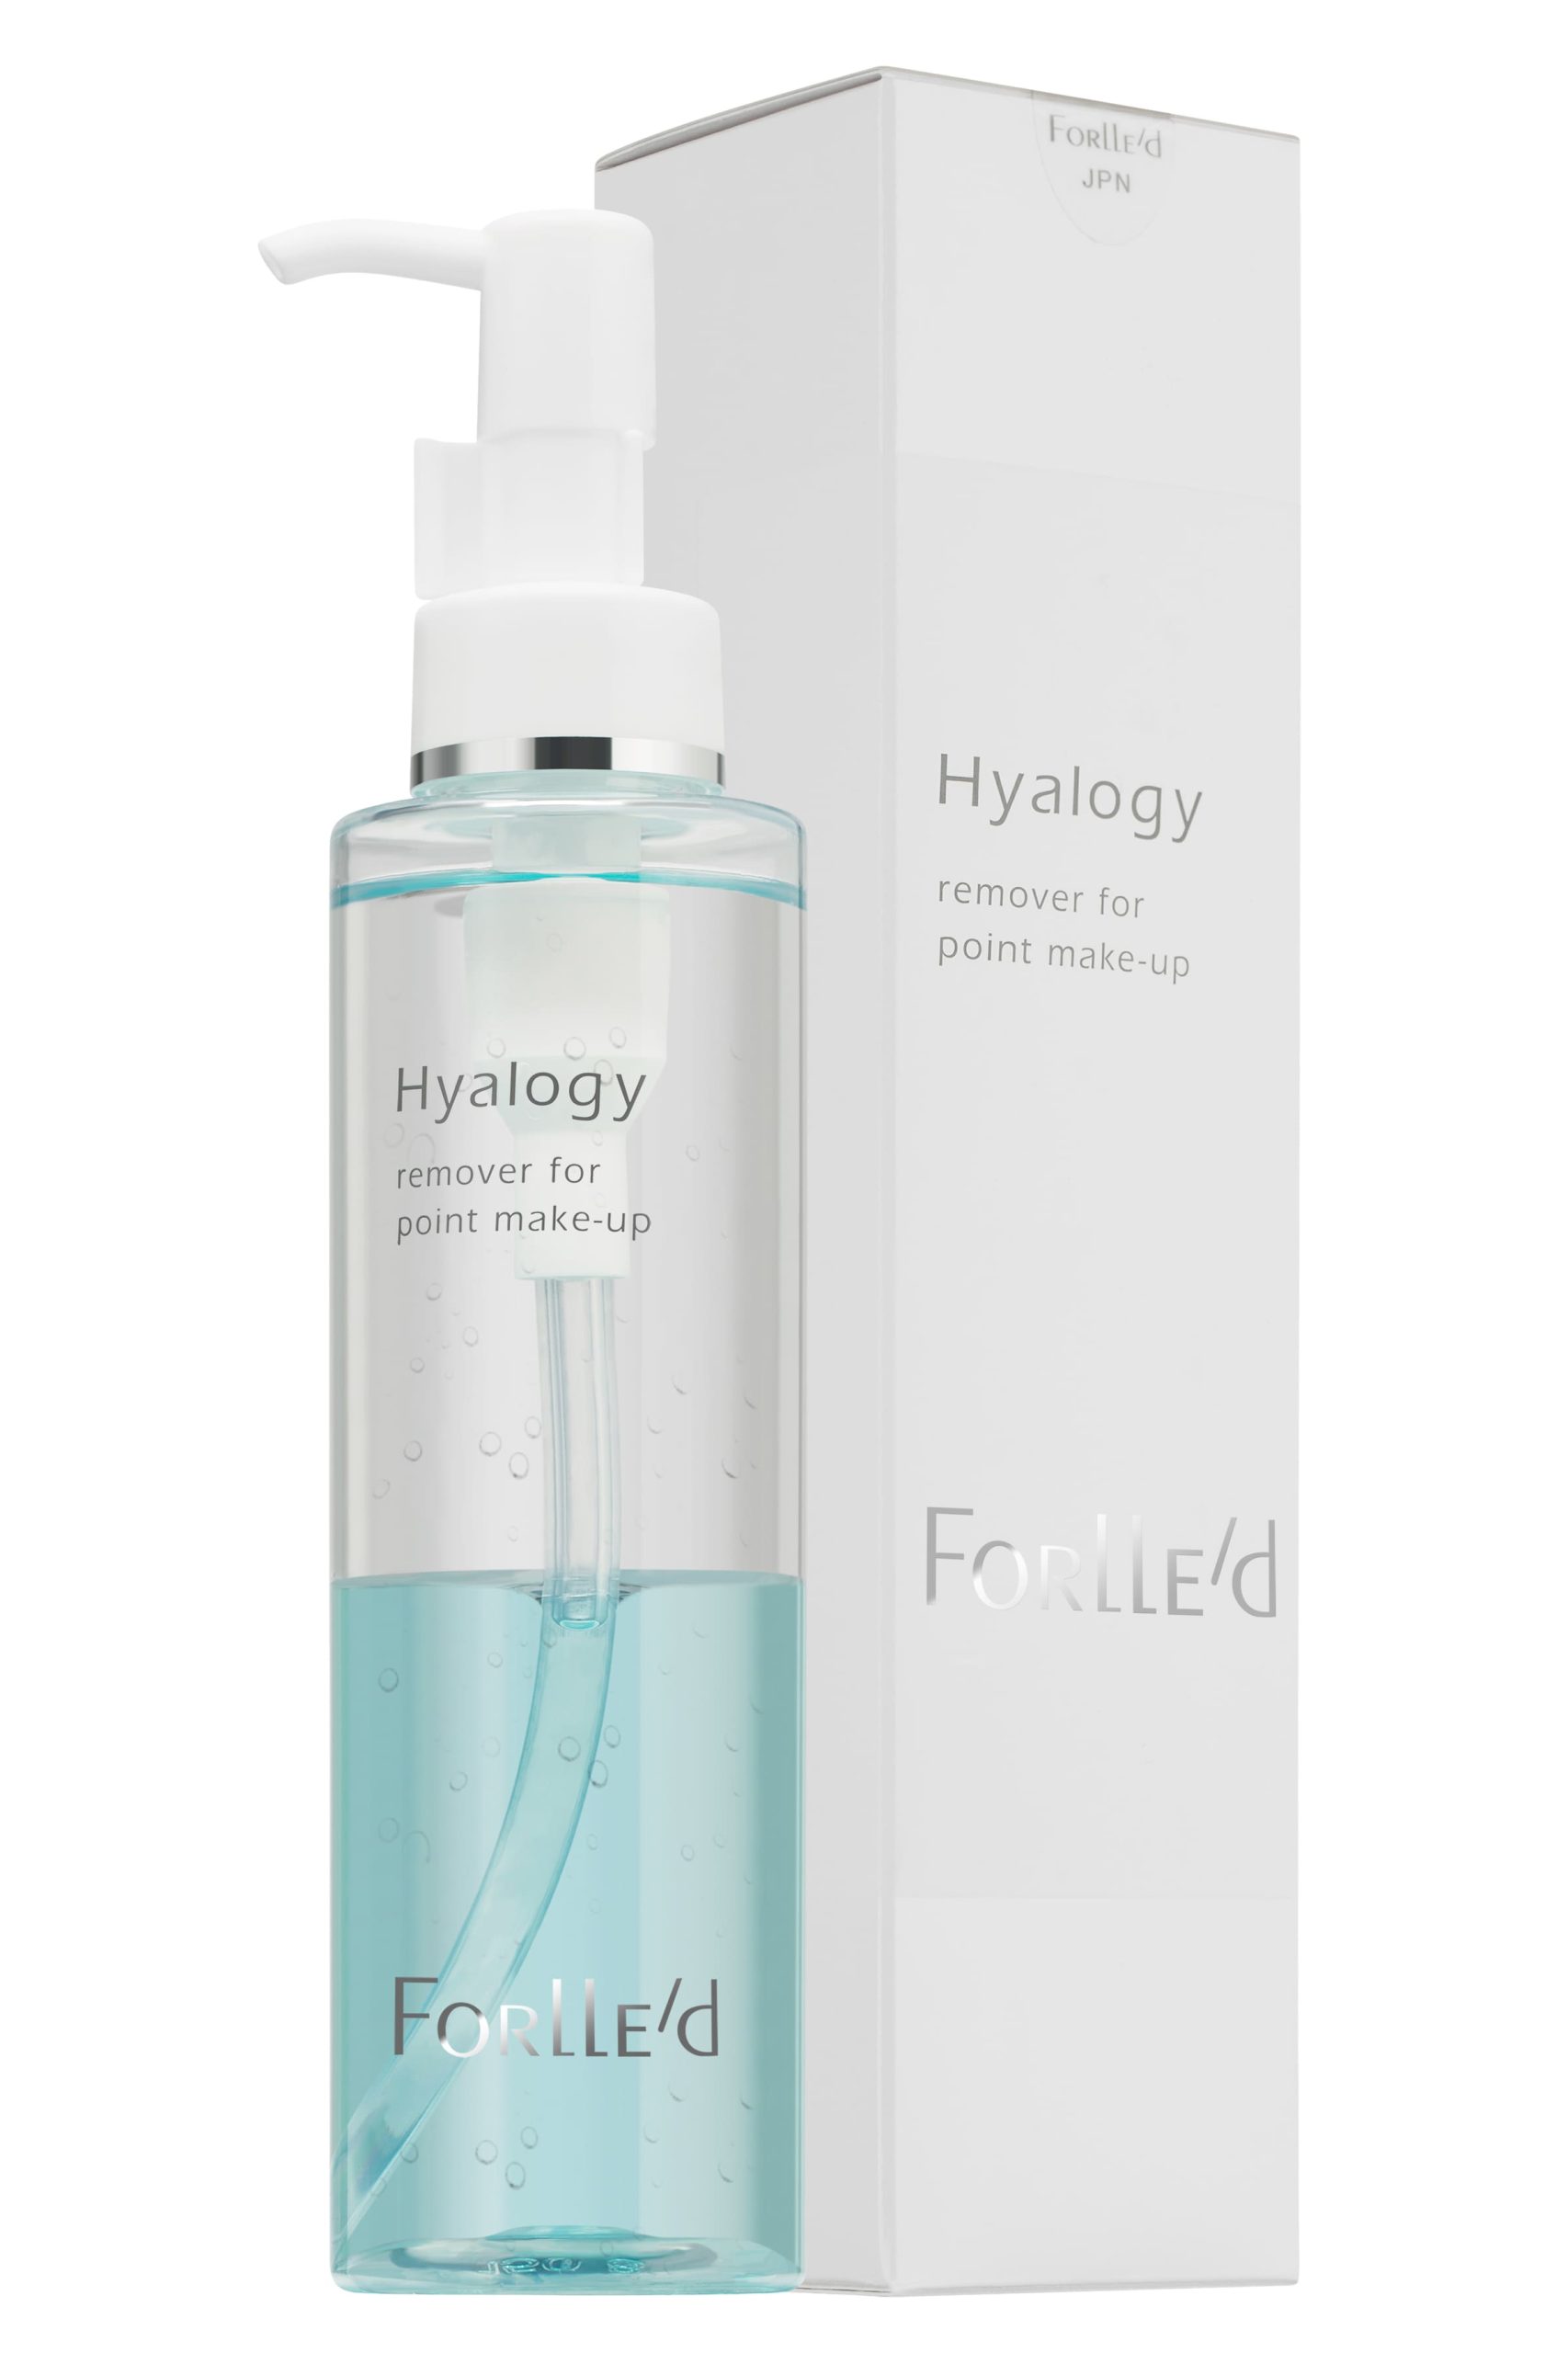 Hyalogy remover for point make-up 